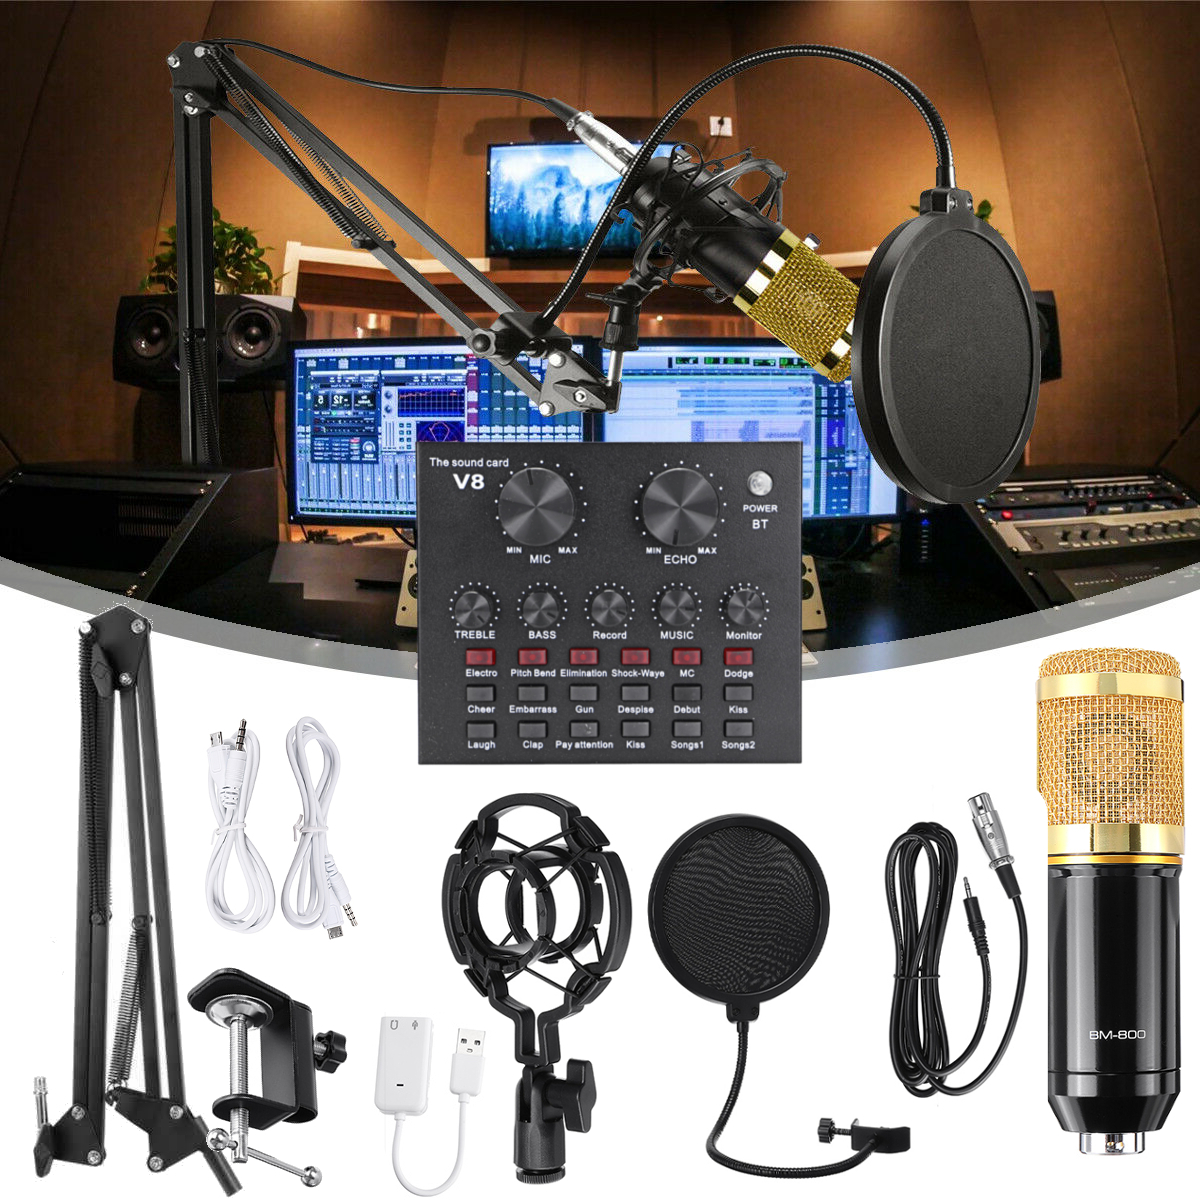 BM800-Condenser-Microphone-V8-Sound-Card-Kit-Muti-functional-bluetooth-Sound-Card-for-Studio-Mobile--1782376-1